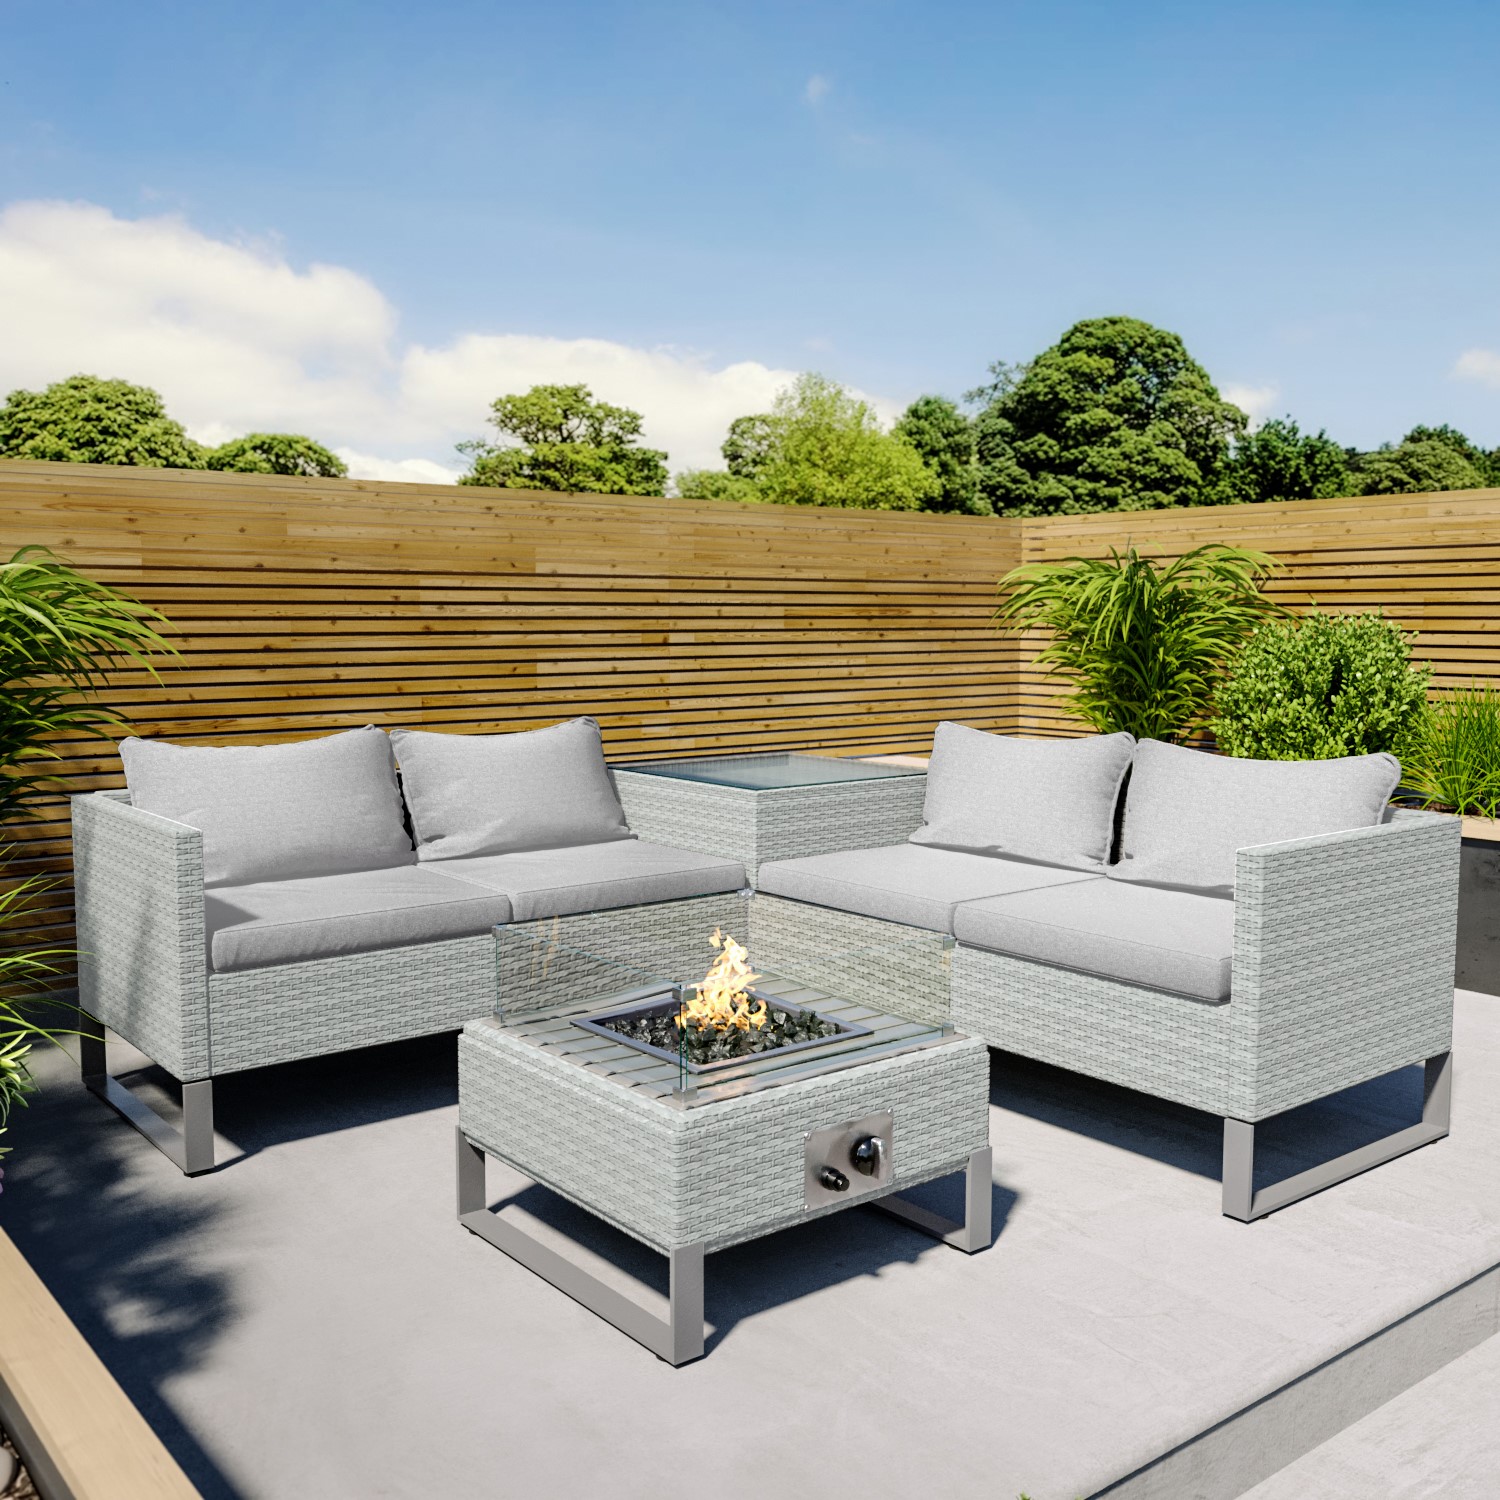 Grey Rattan Garden Corner Sofa Set With, Garden Table And Chairs With Fire Pit